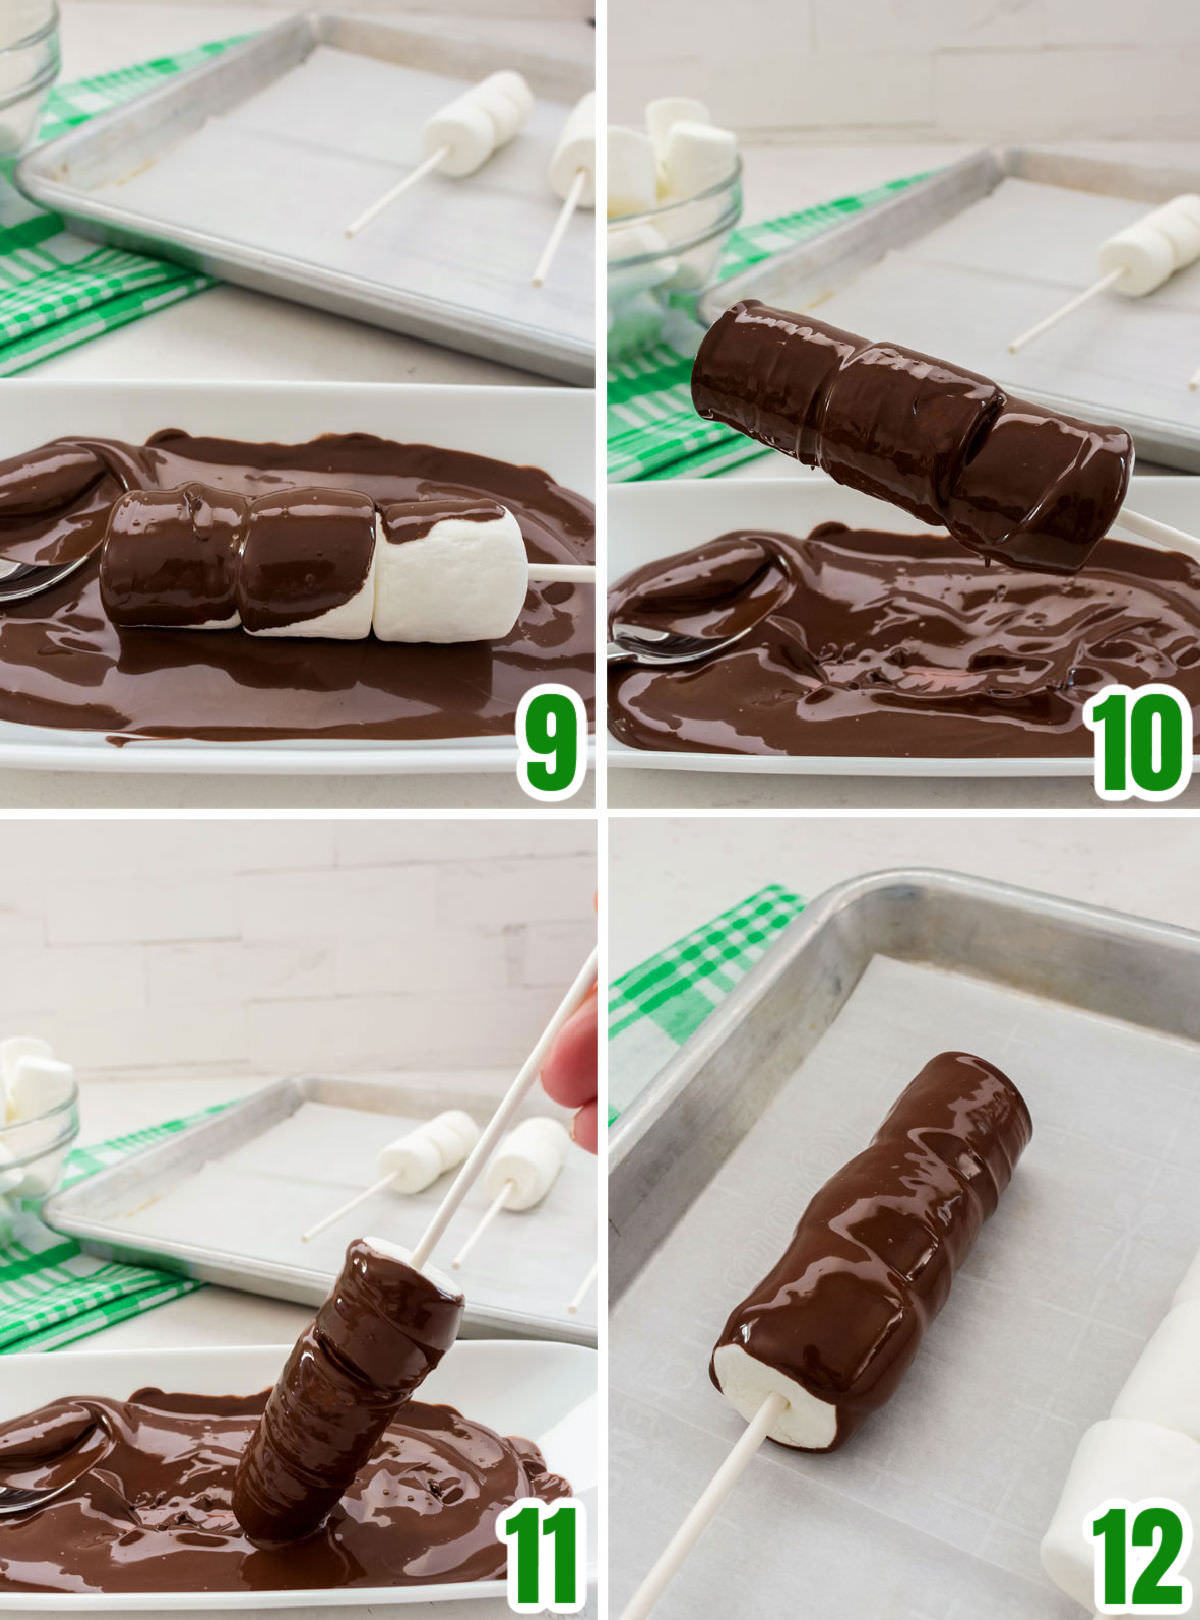 Collage image showing the steps required to dip the marshmallow pops in chocolate.